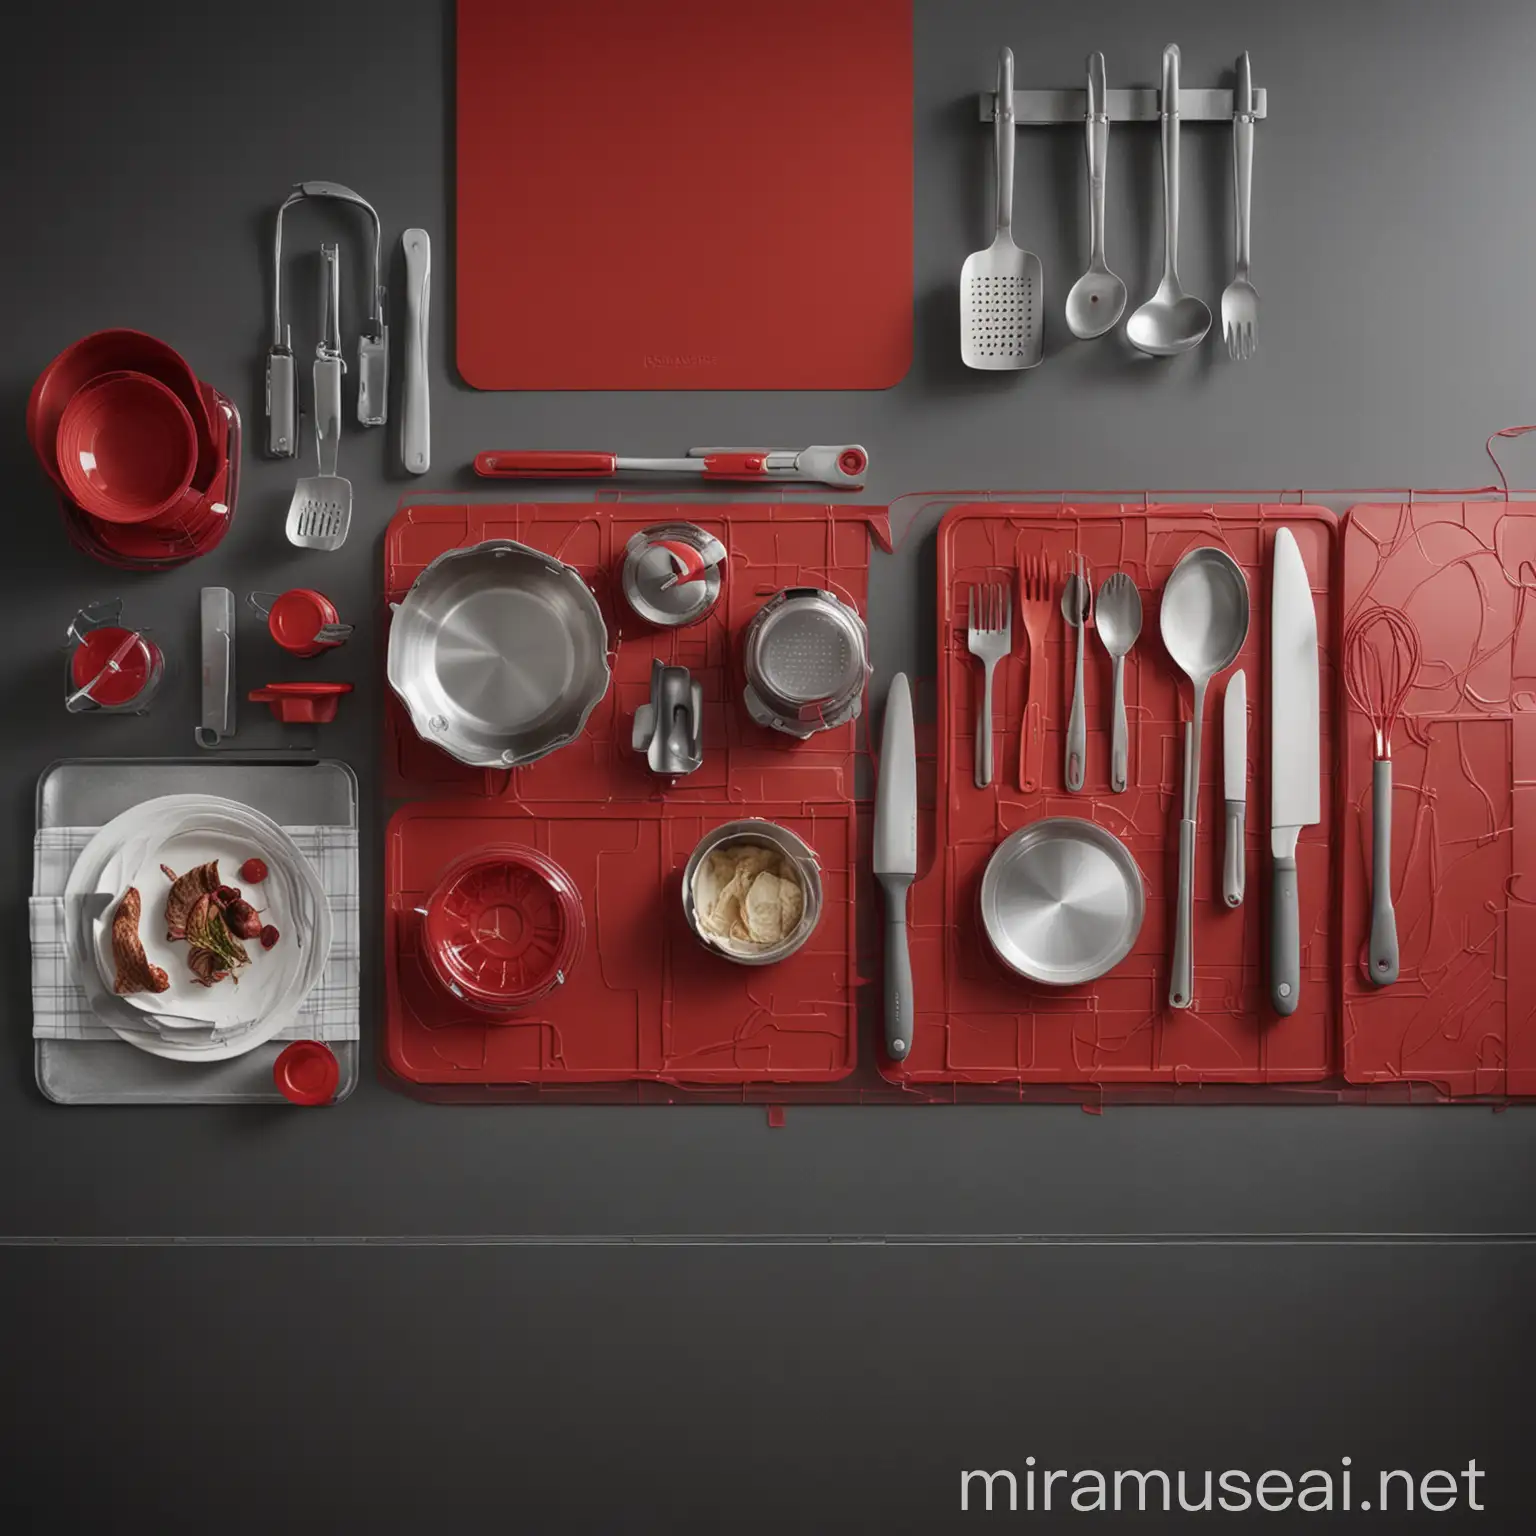 Modern Couple Cooking Together at Home Vibrant Metallic Palette and Innovative Technology